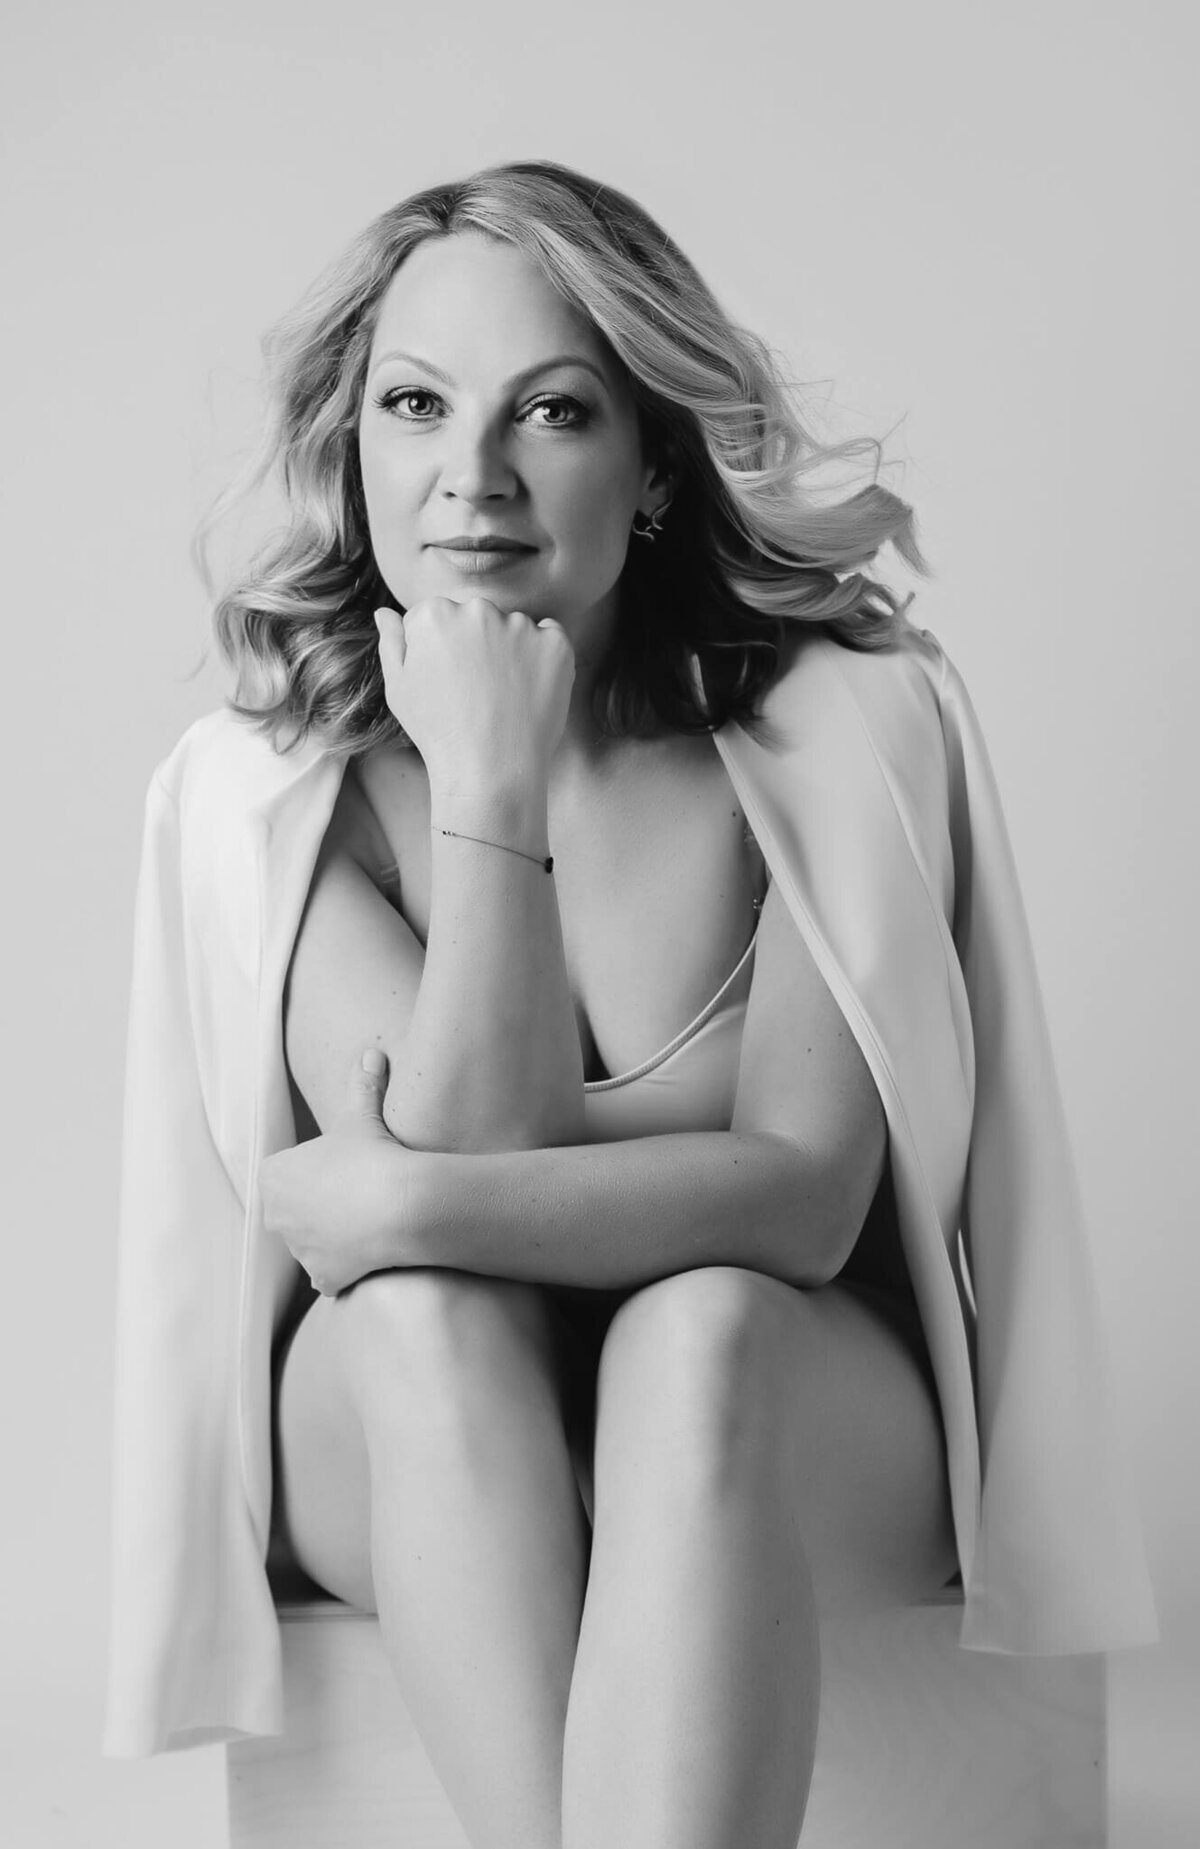 Black and white portrait where you can see a beautiful blonde woman in her 40's posing in an elegant way, she is wearing a coat and a bodysuit and is sitting on a chair